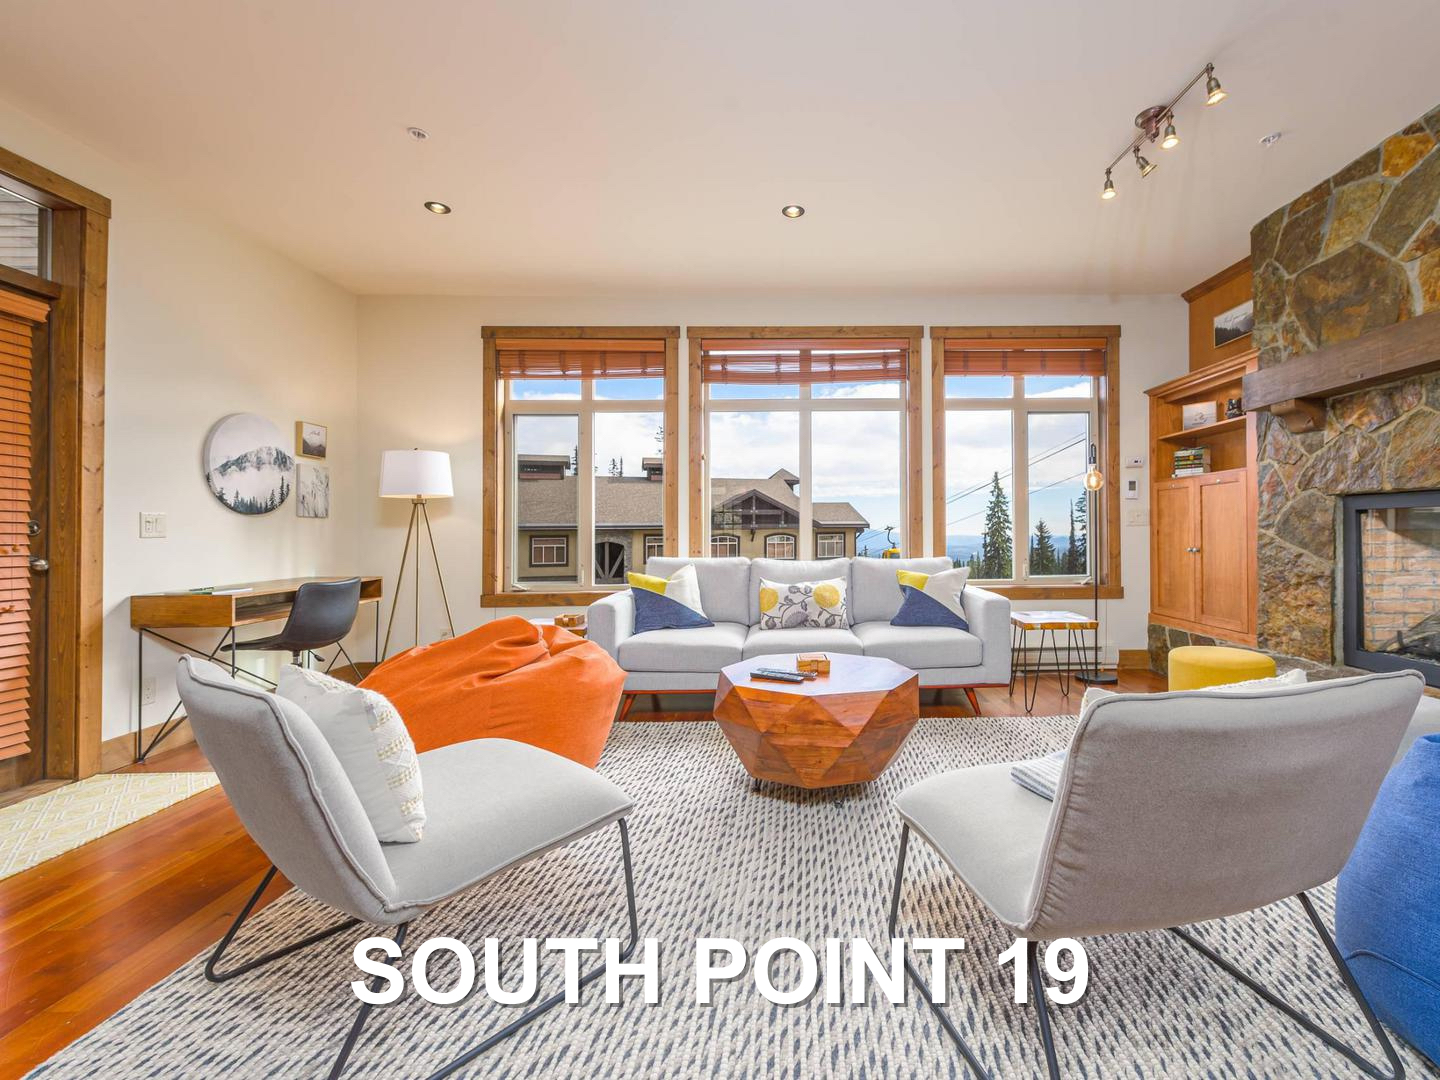 South Point 19's luxury living room, with a stone fireplace, modern grey chairs and couches, and large window with natural light, located at Big White Ski Resort and managed by Luxury Mountain Vacation Rentals.